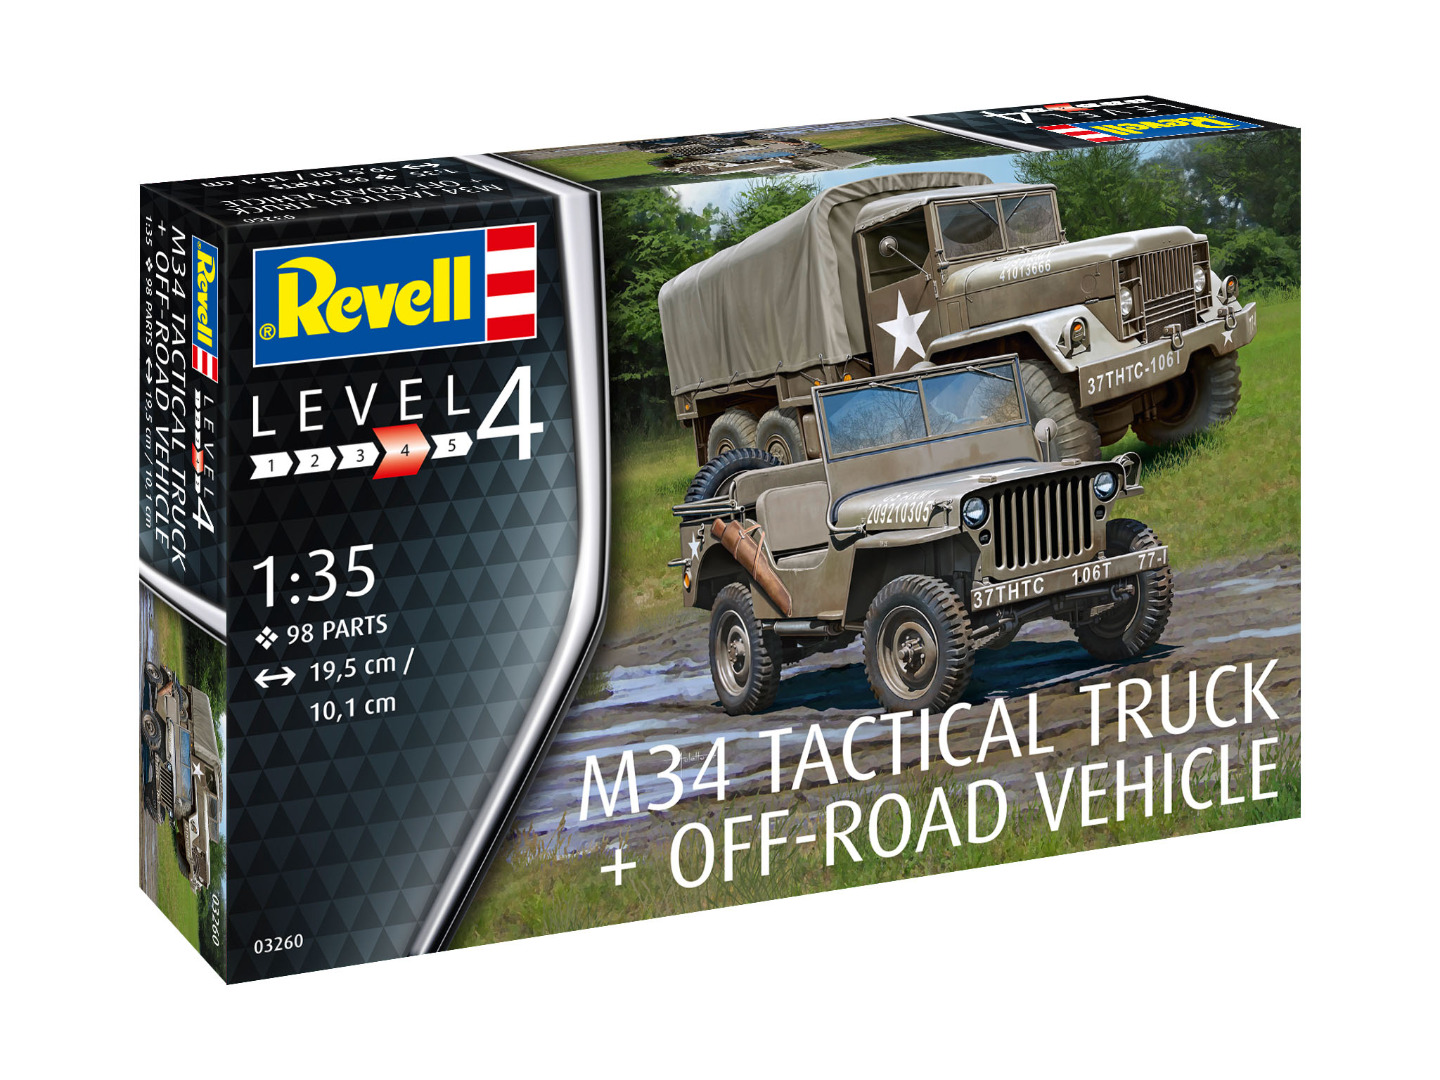 Revell Model Kit M34 Tactical Truck + Off-Road Vehicle 1:35